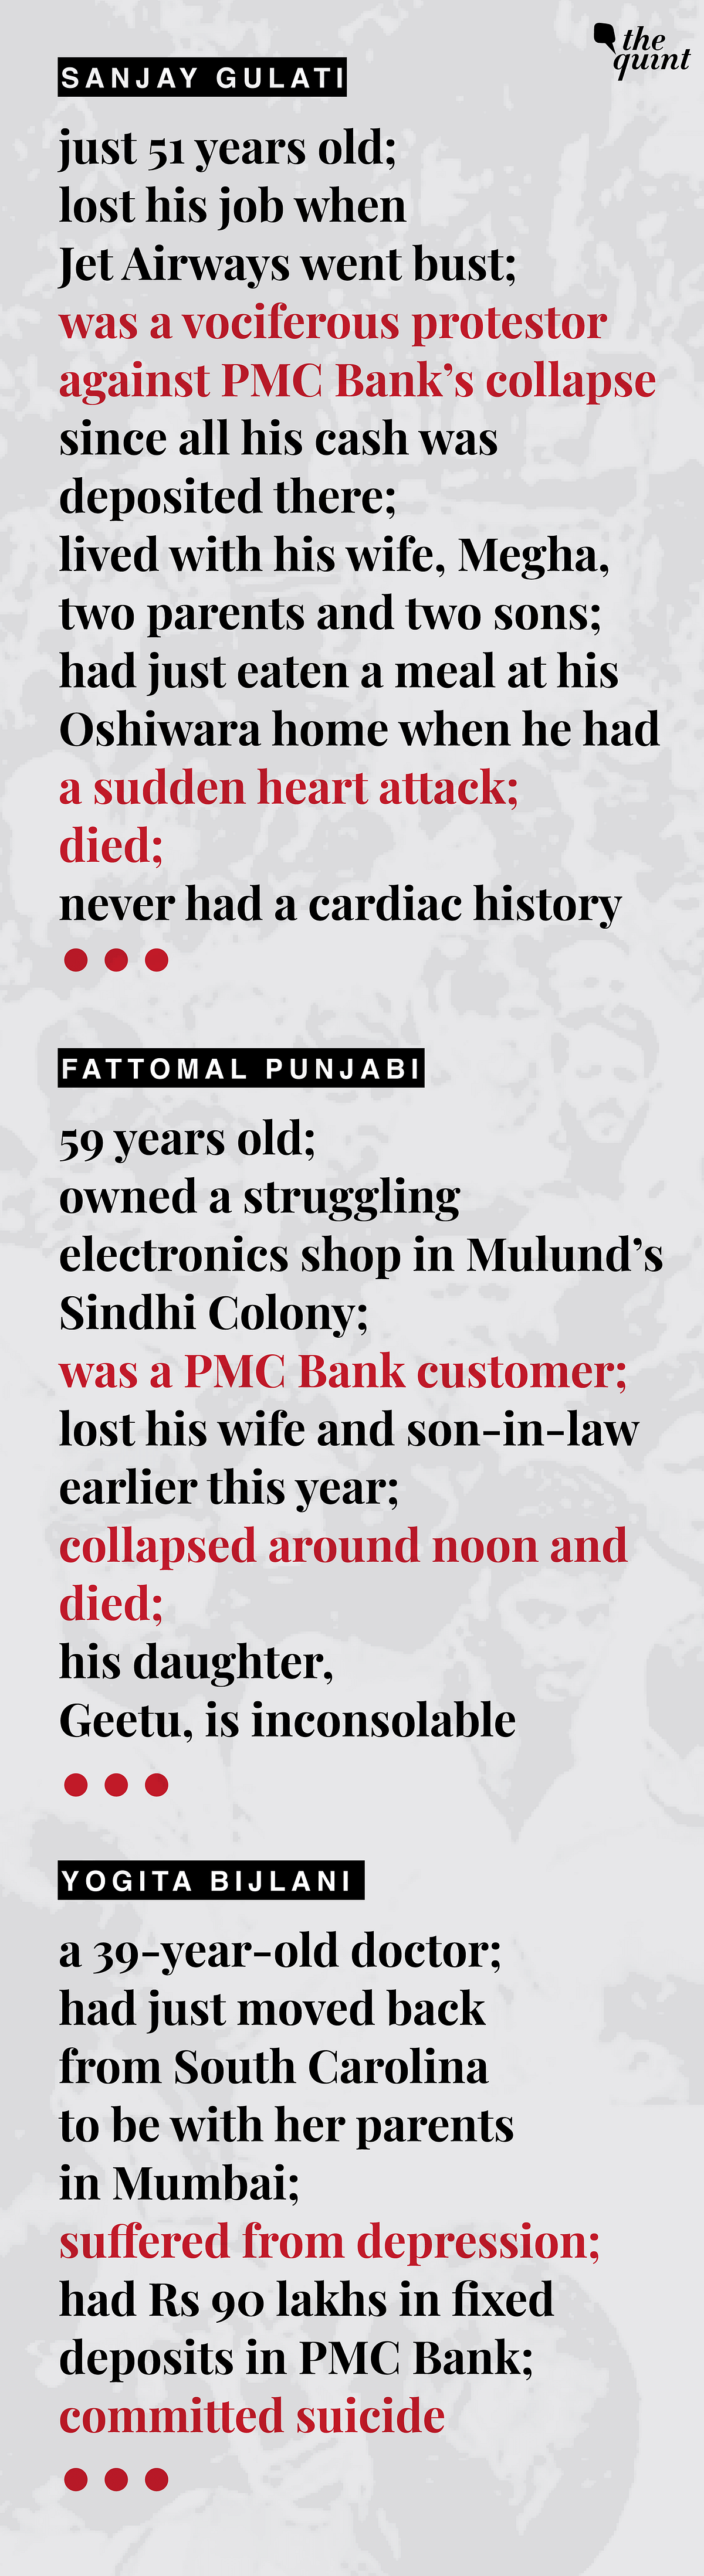 A high-living father-son duo had 44 bank accounts in a loosely regulated outfit — PMC Bank.